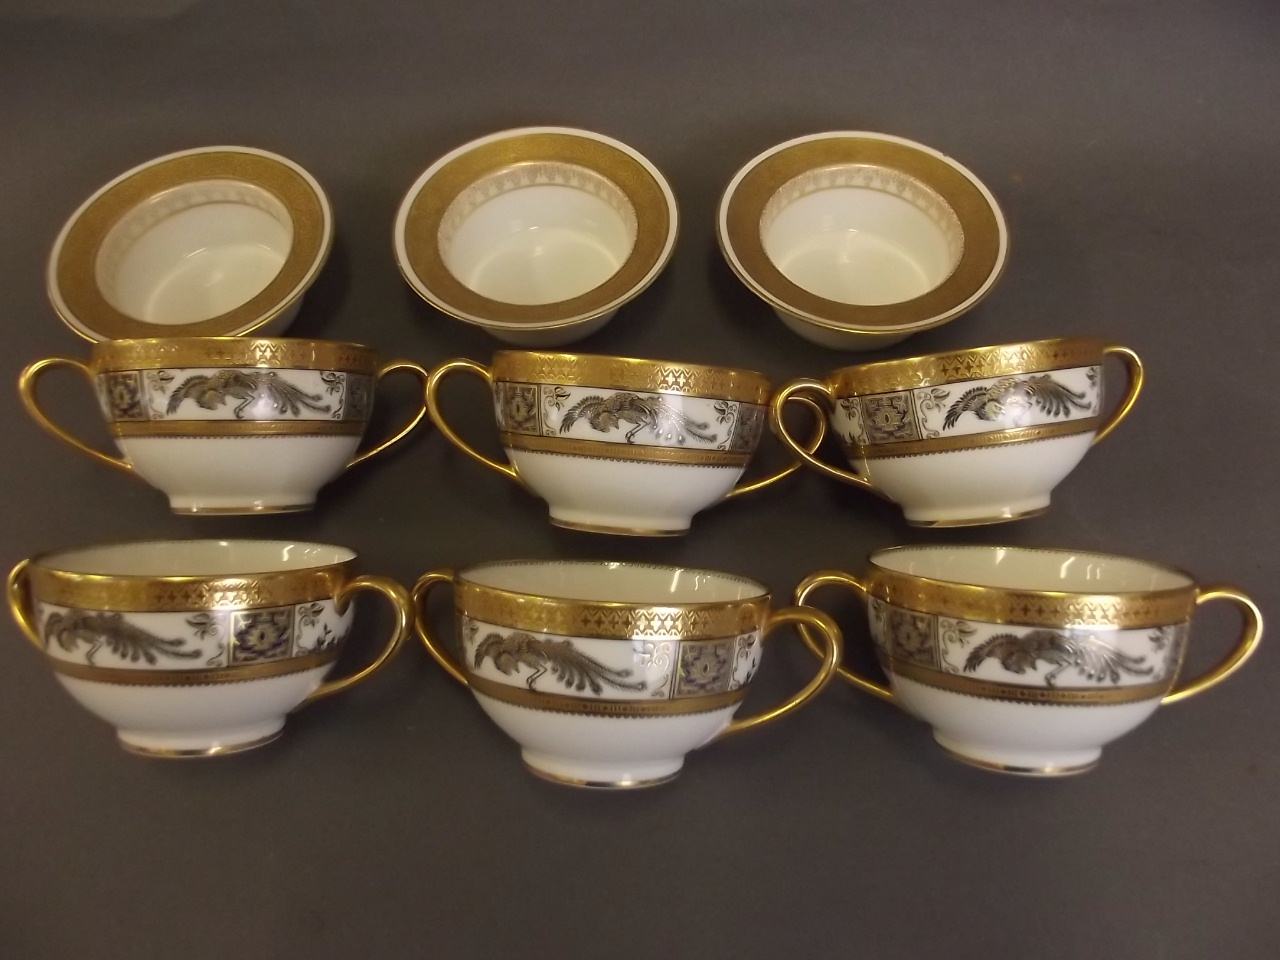 A set of 6 Limoges porcelain twin handled cups decorated in black and gilt with exotic birds